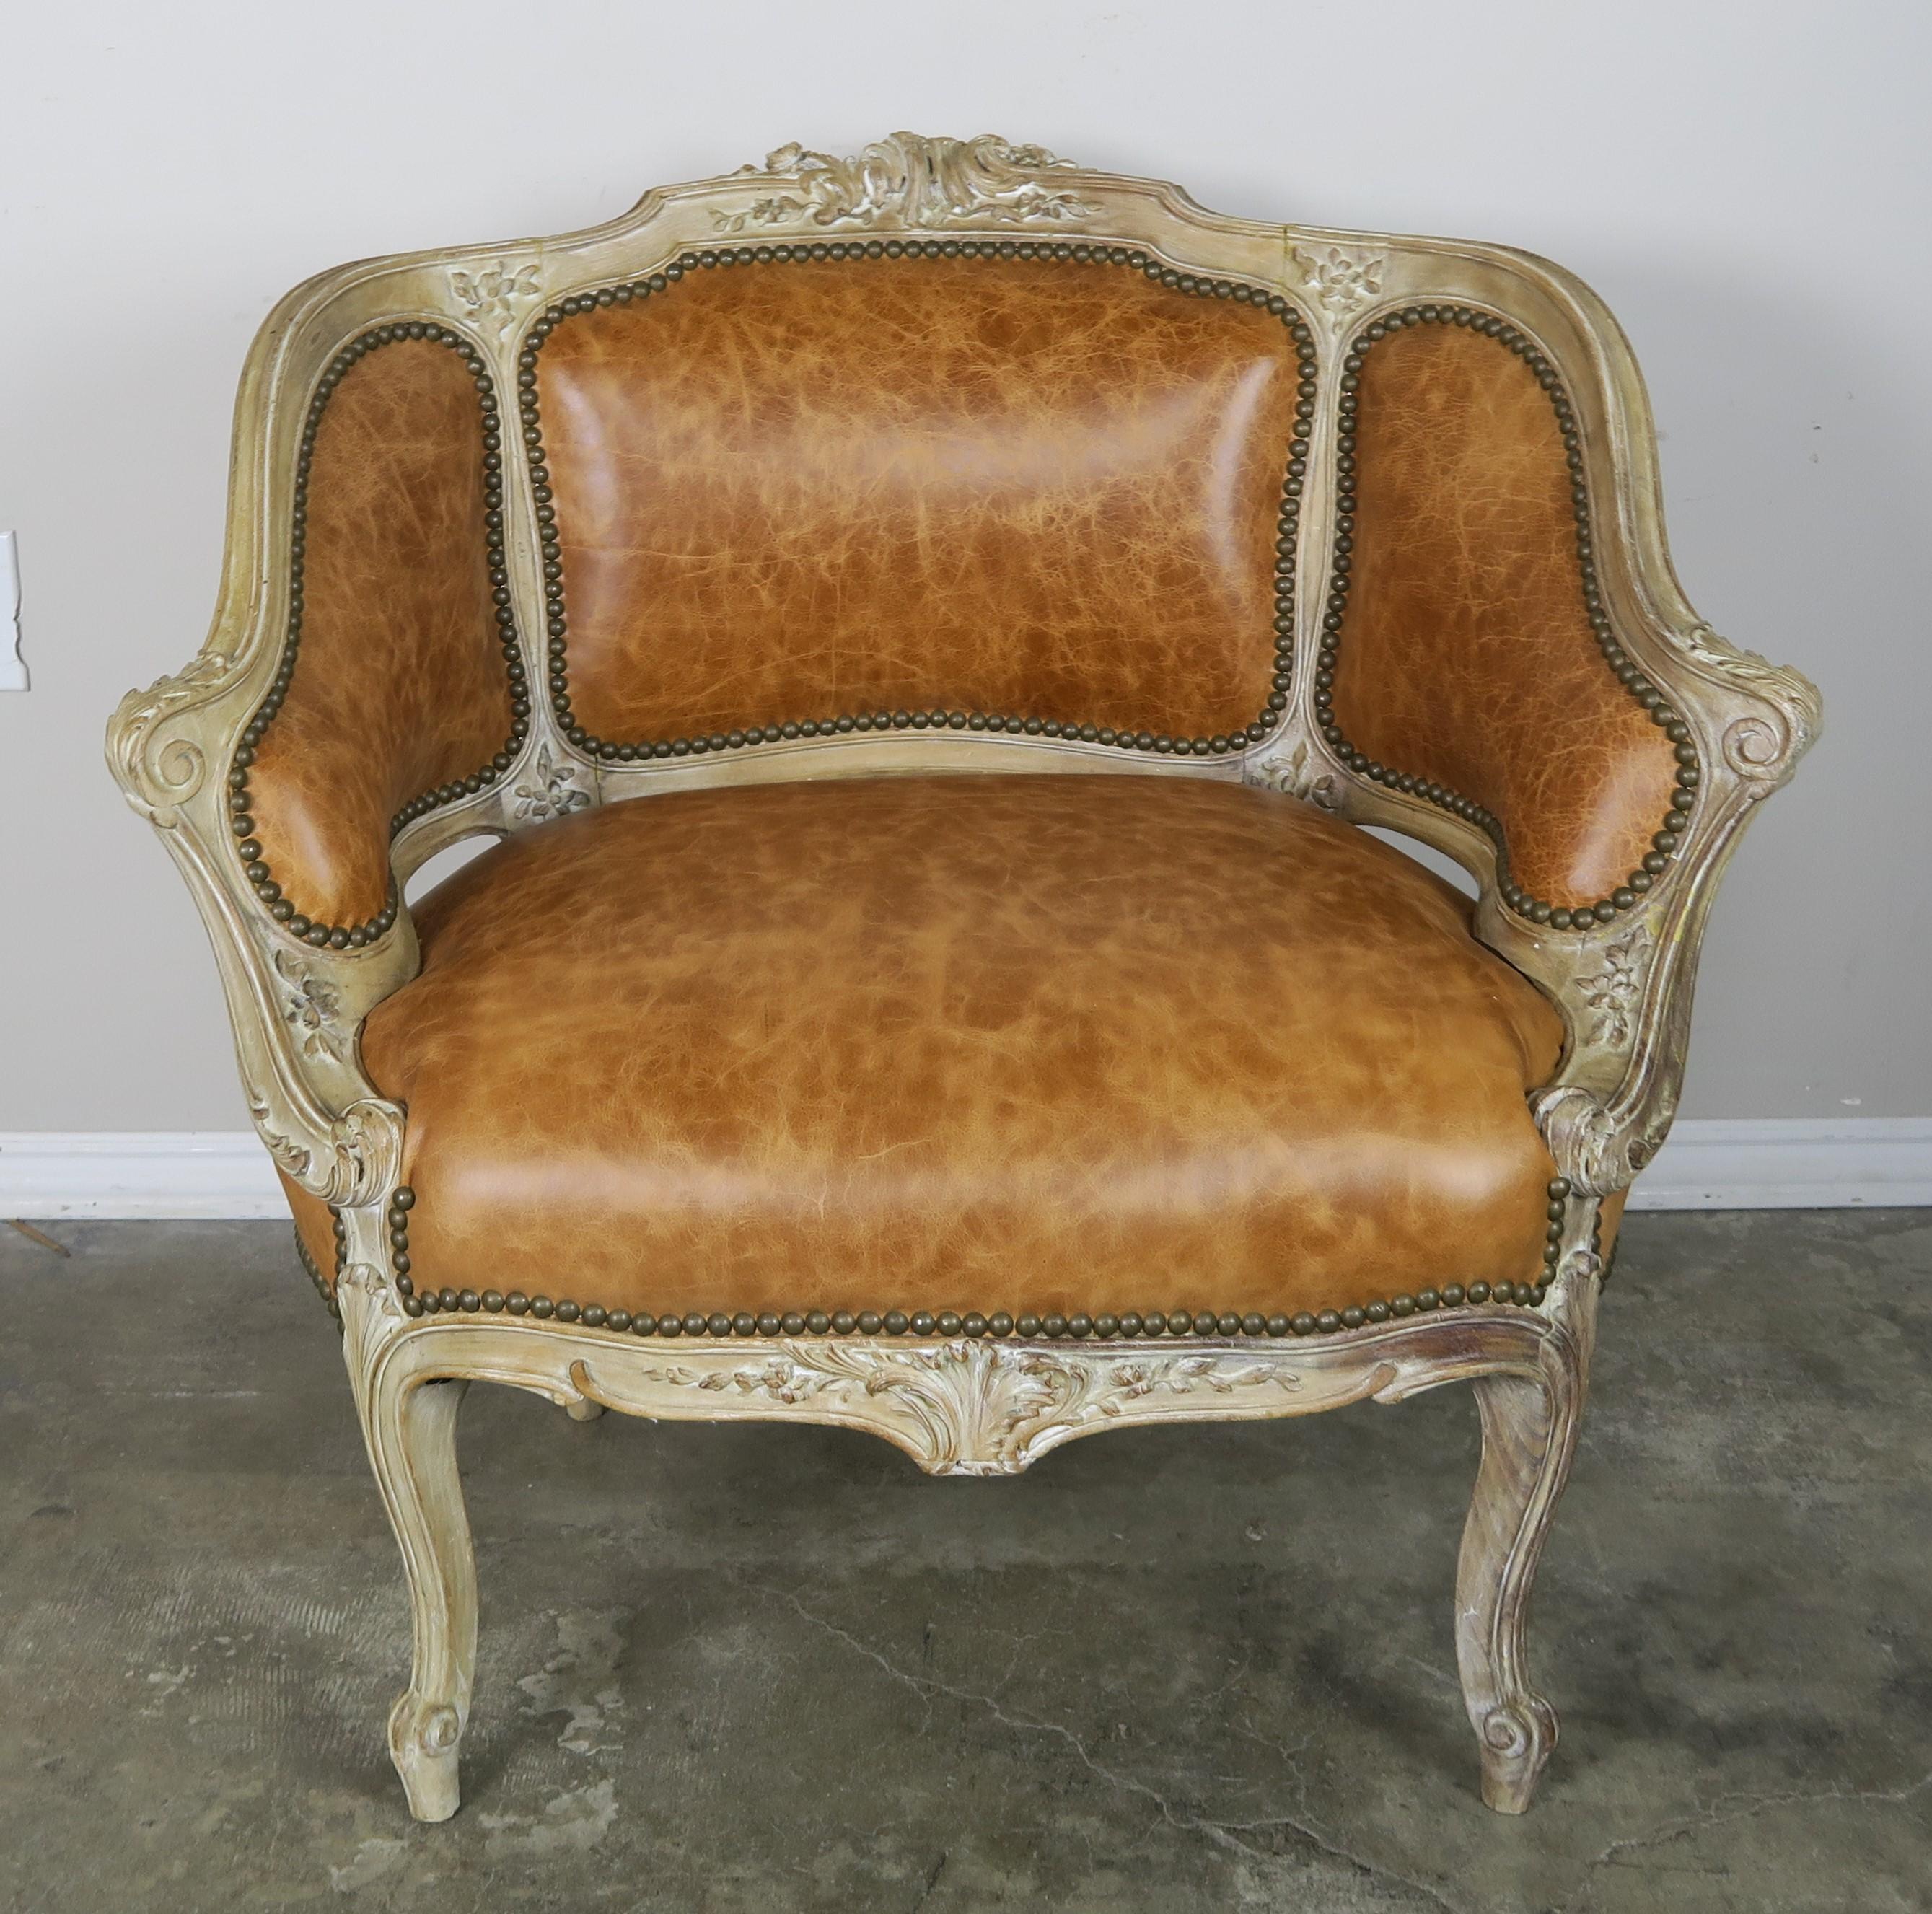 French Louis XV style painted armchairs upholstered in leather with nailhead trim detail. The beautiful armchairs stands on four cabriole legs that end in rams head feet. Beautiful weathered finish on the frame.
Measures: S.H. 16